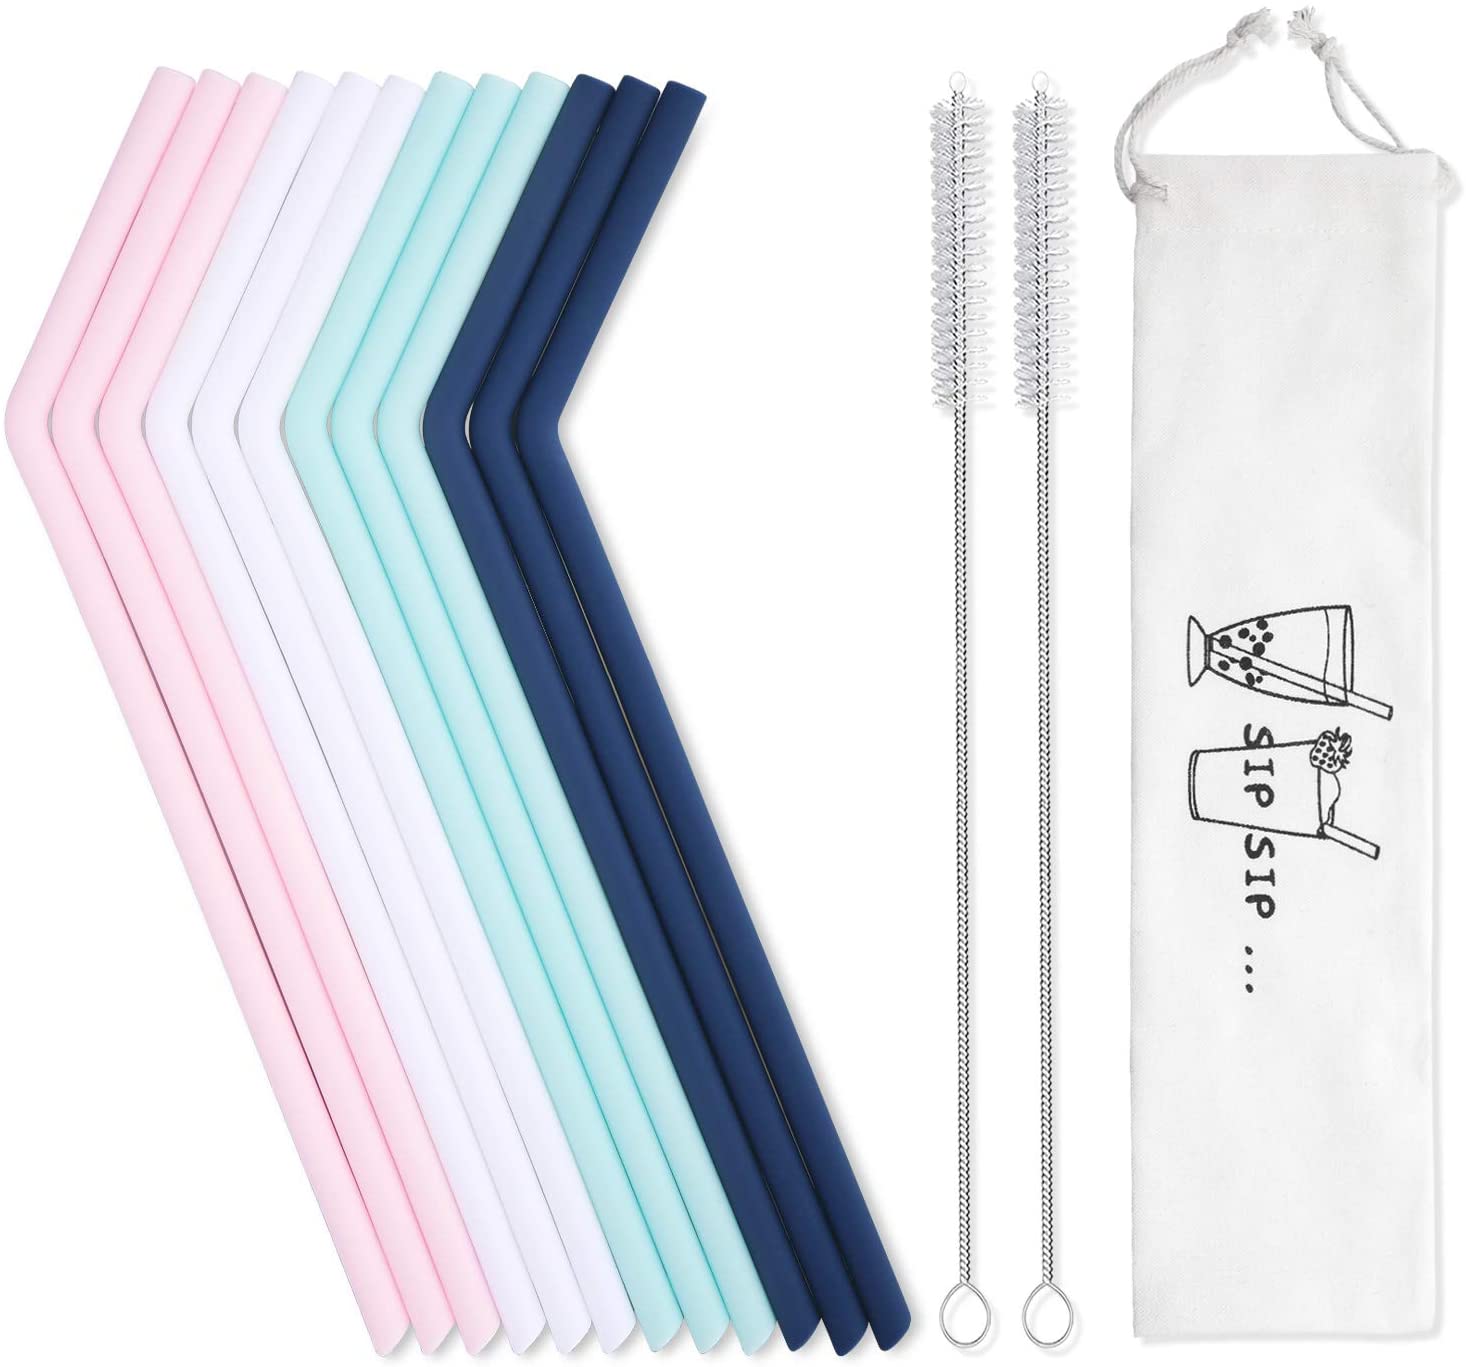 https://www.dontwasteyourmoney.com/wp-content/uploads/2020/09/hiware-long-silicone-reusuable-straw-12-pack-reusable-straw.jpg